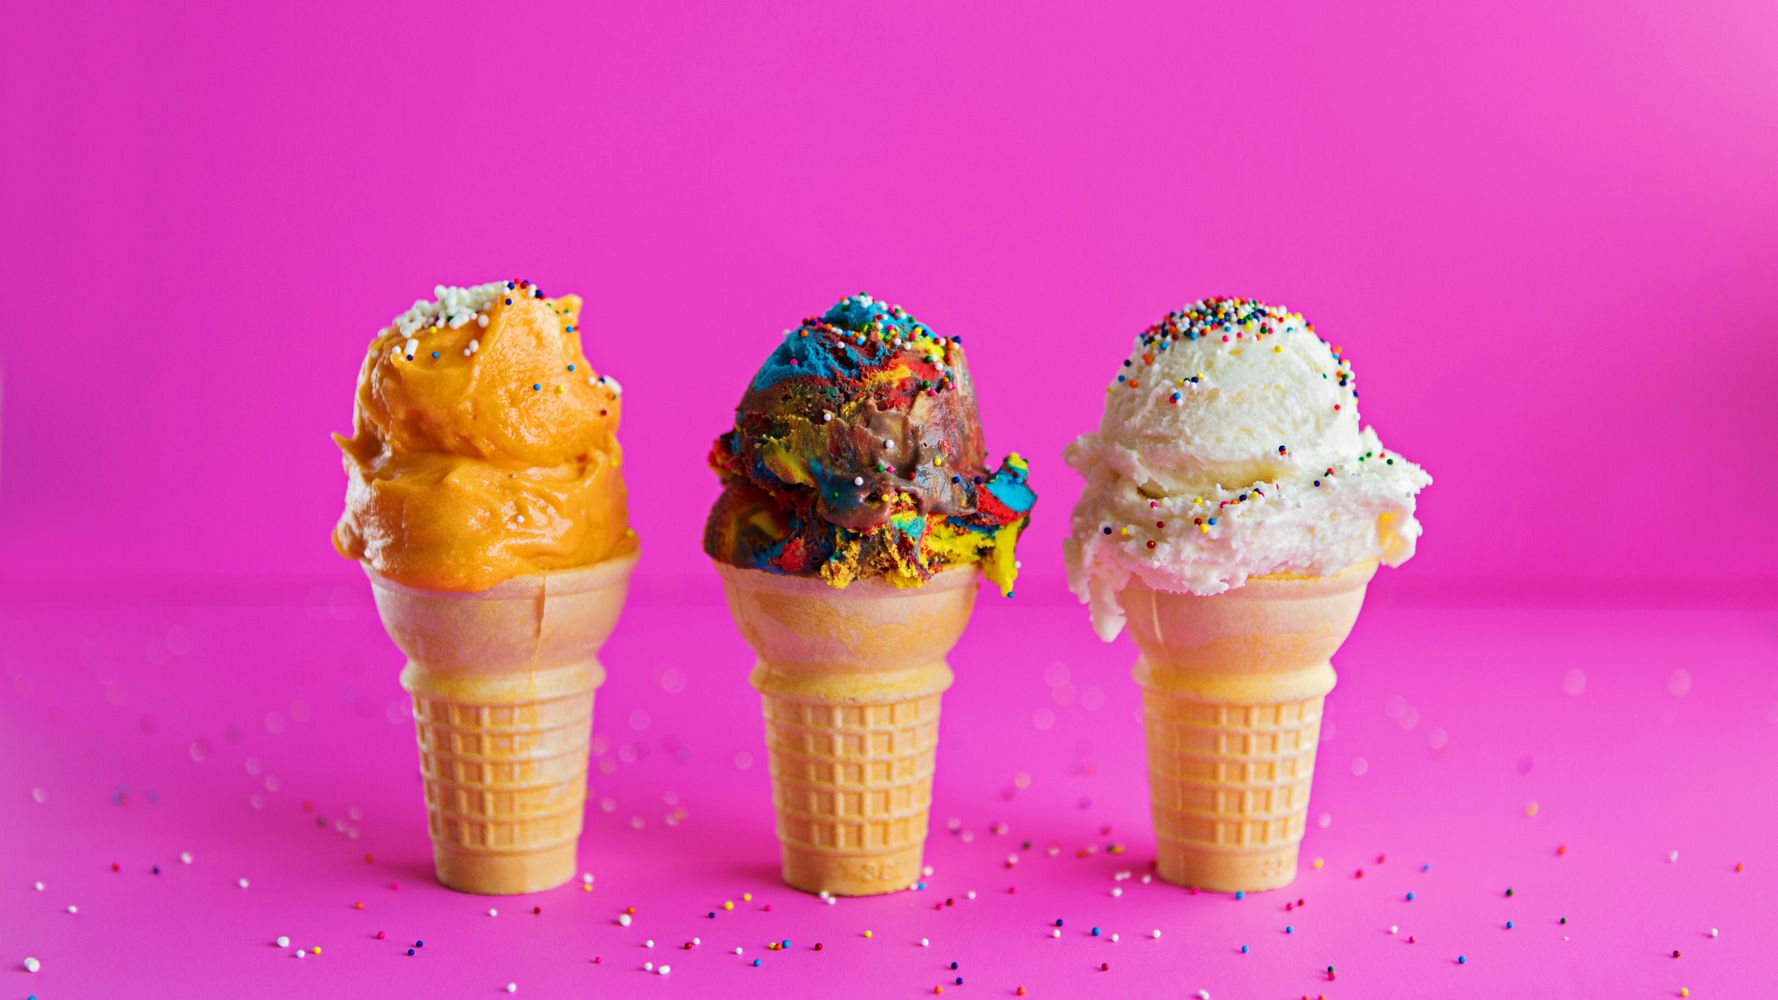 A No-BS Guide To Finding The Best Ice Cream Maker For You